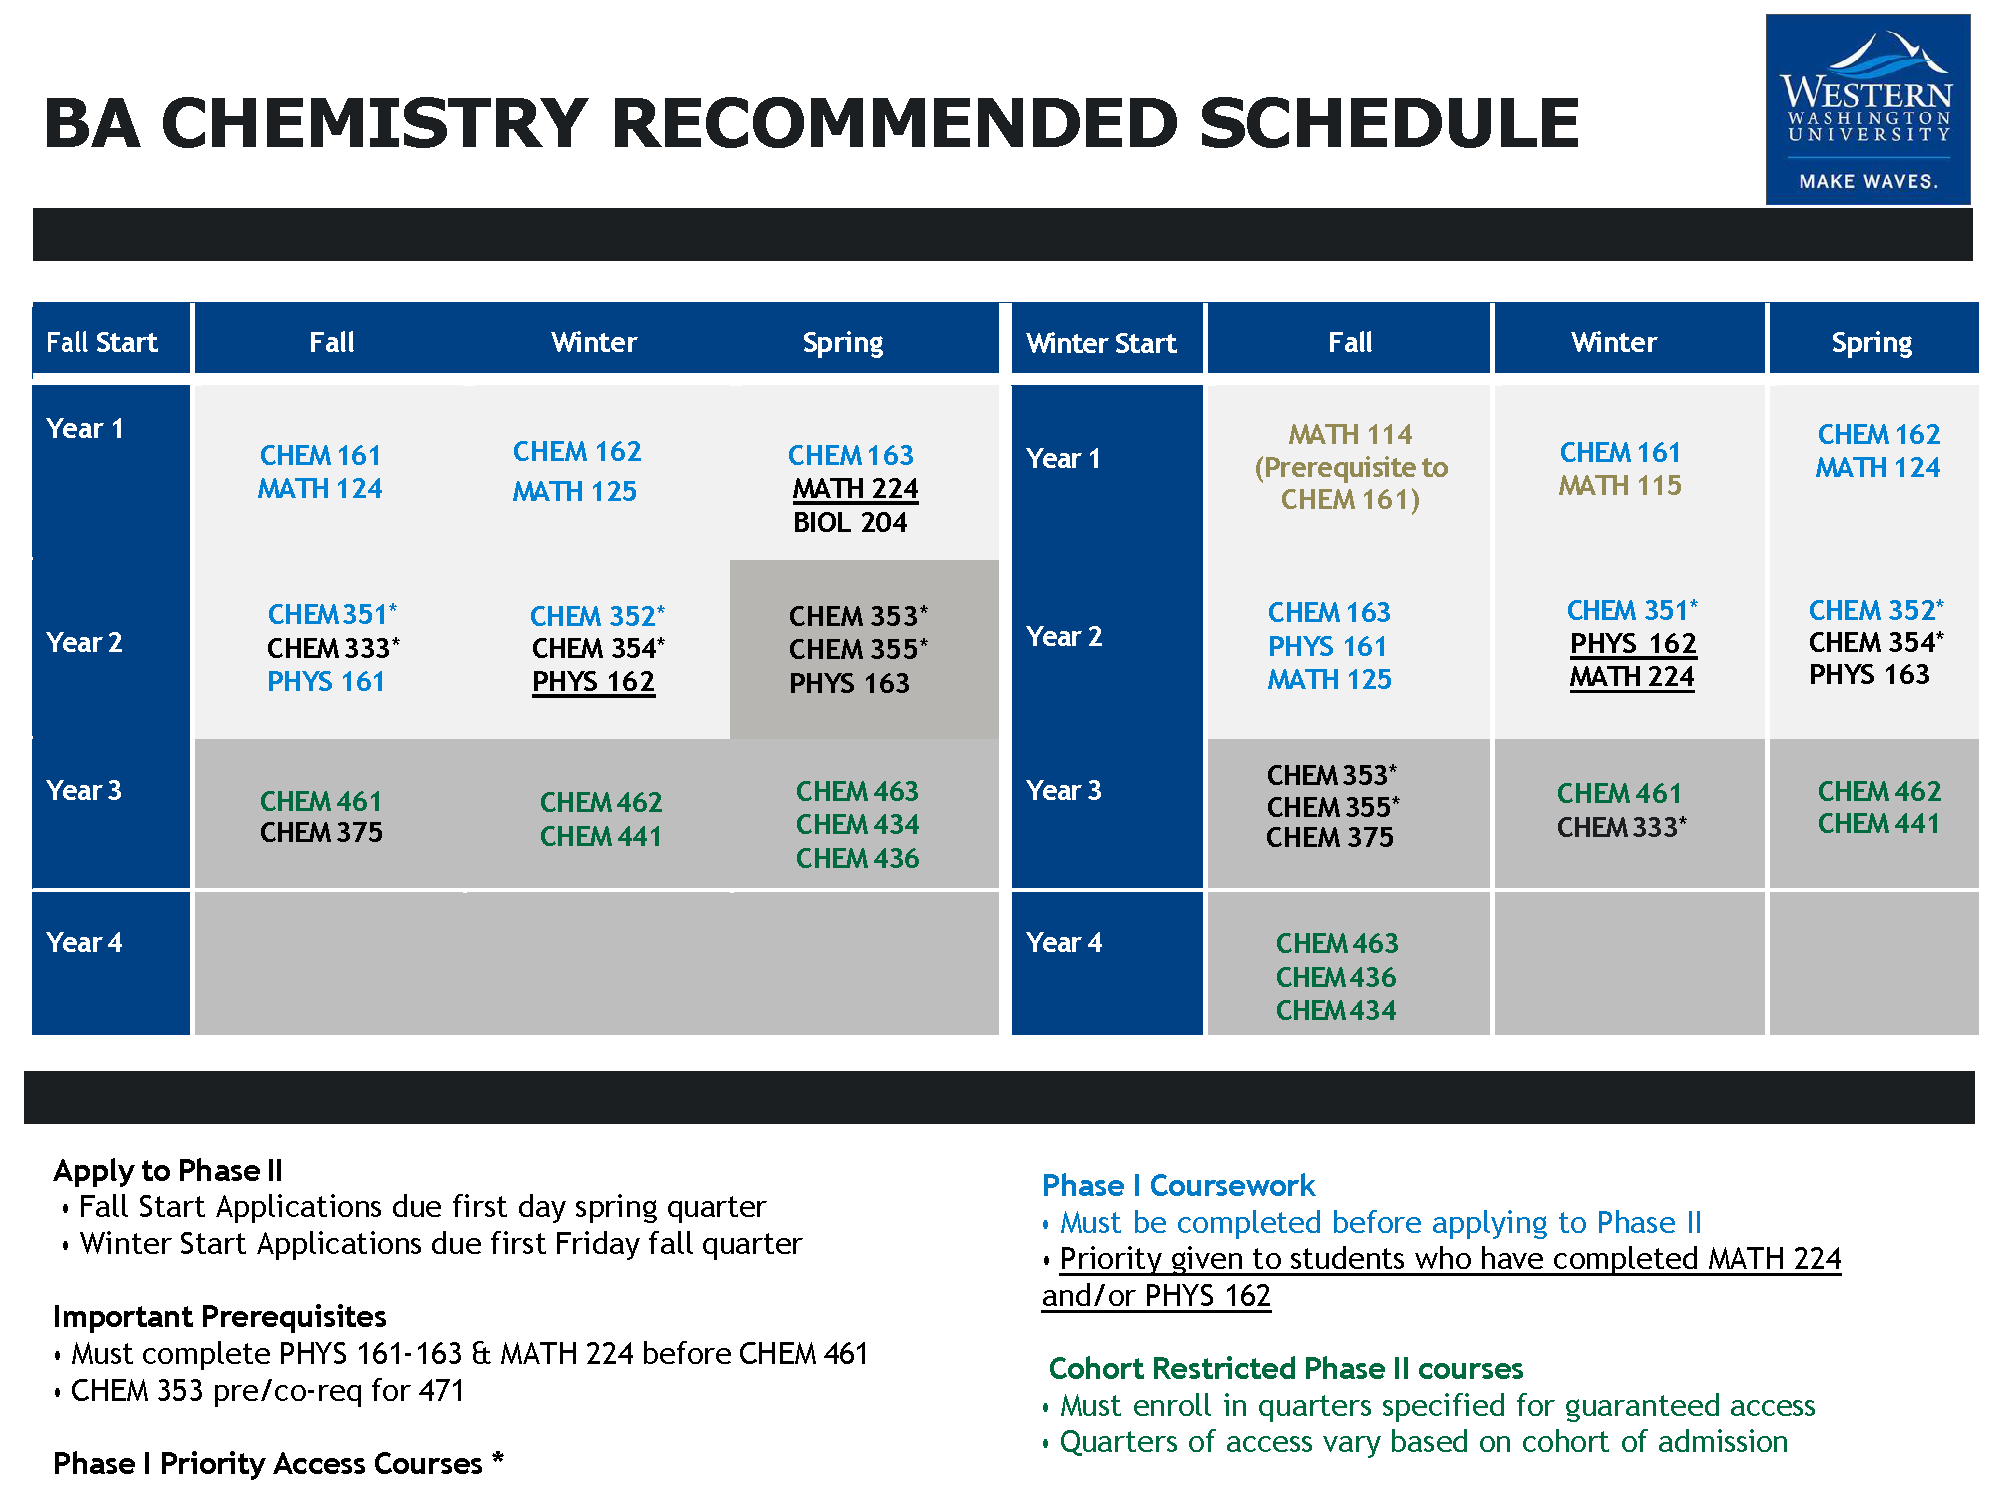 BA Chemistry Recommended Course Schedule